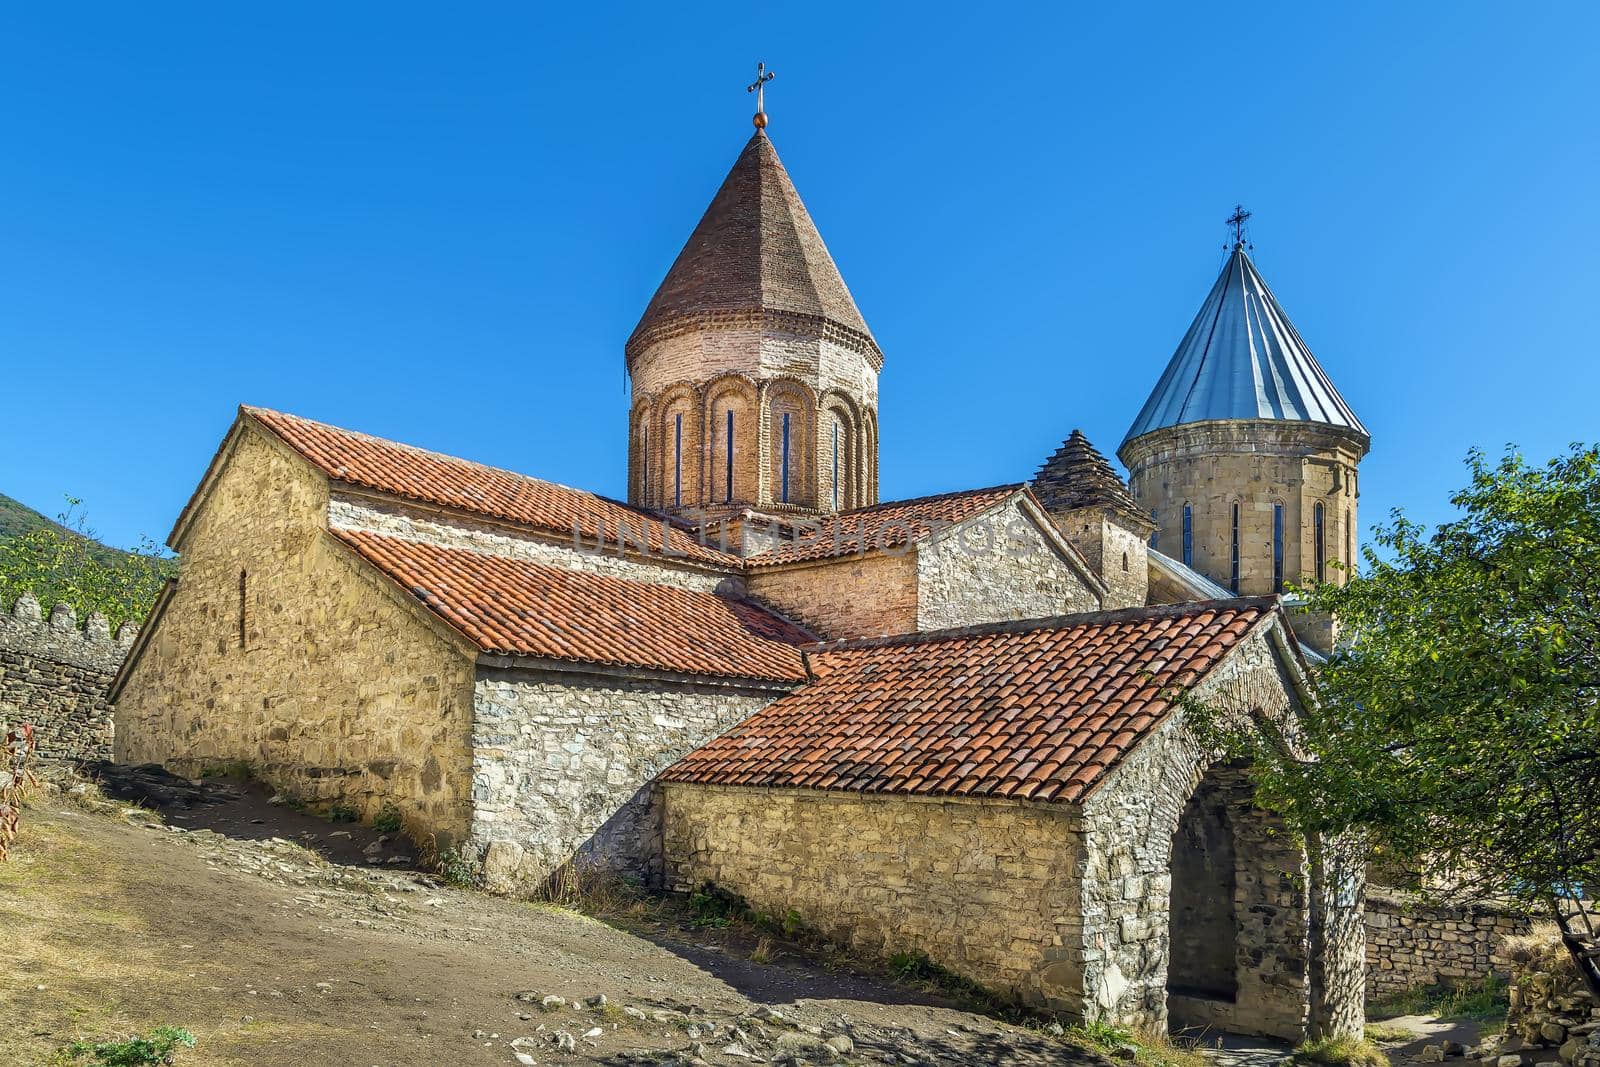 Churches in Ananuri fortress, Georgia. View from the courtyard